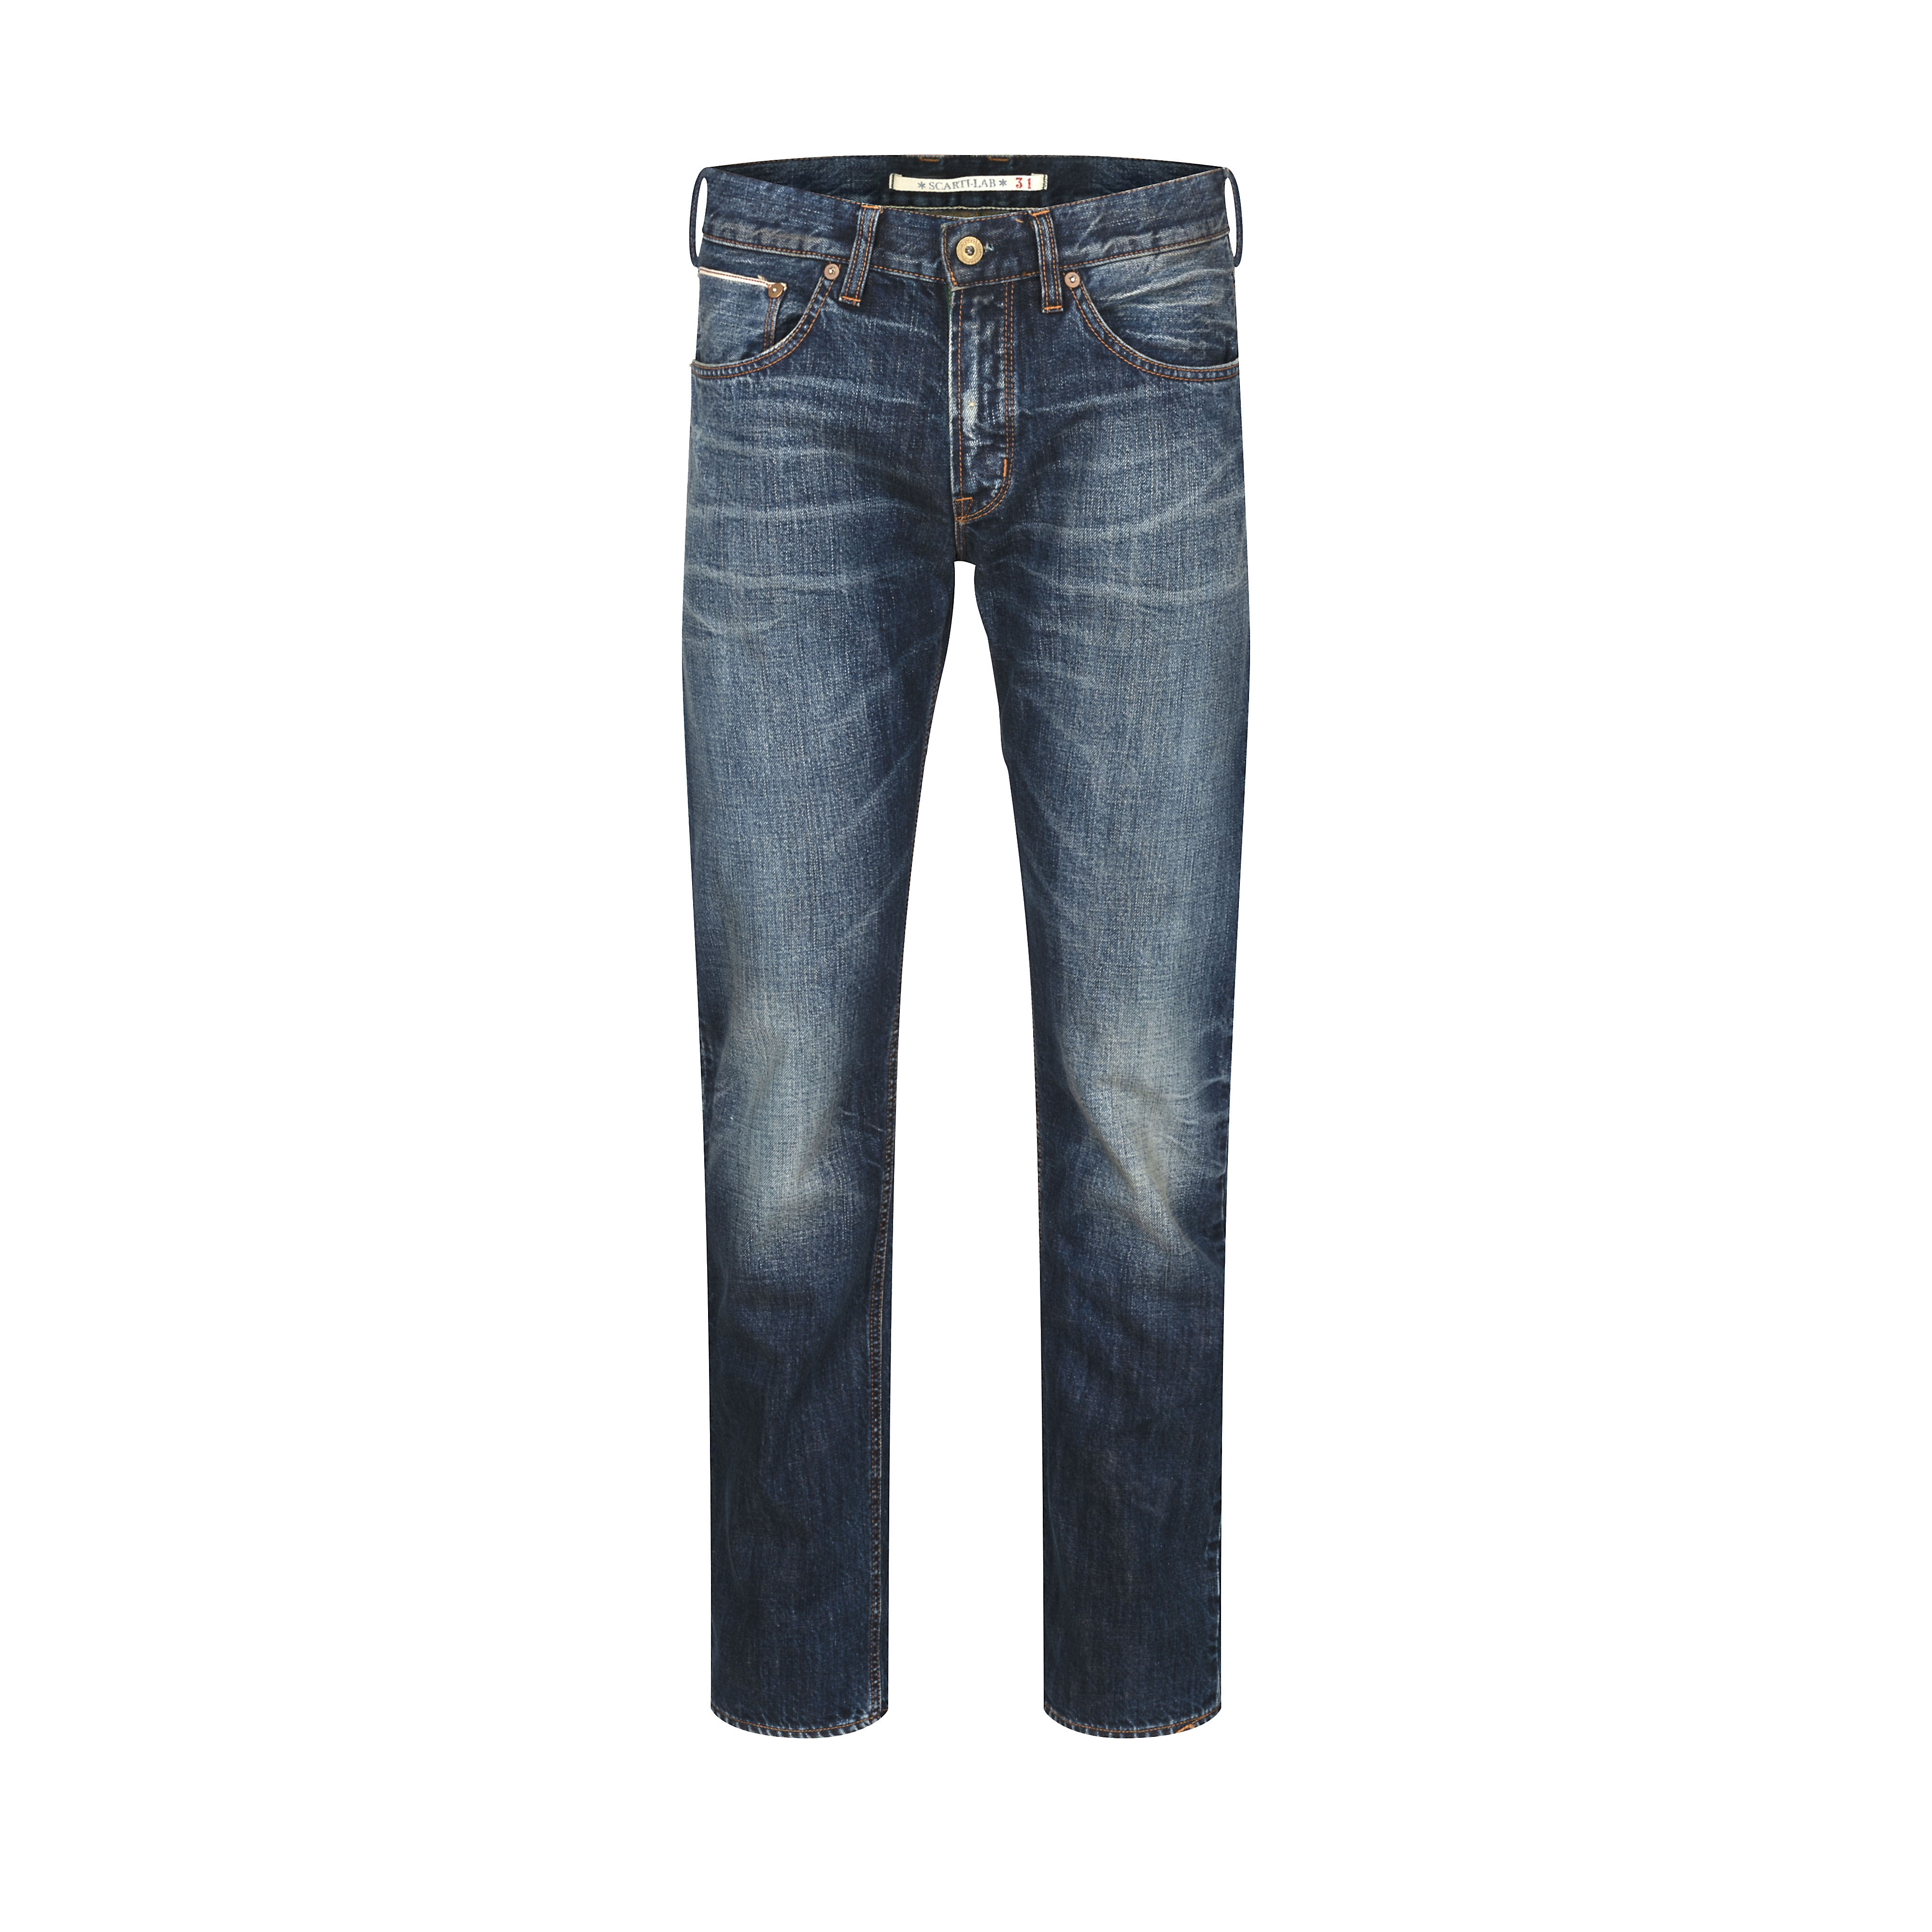 Washed Denim Jeans 06RS ST820 – B74